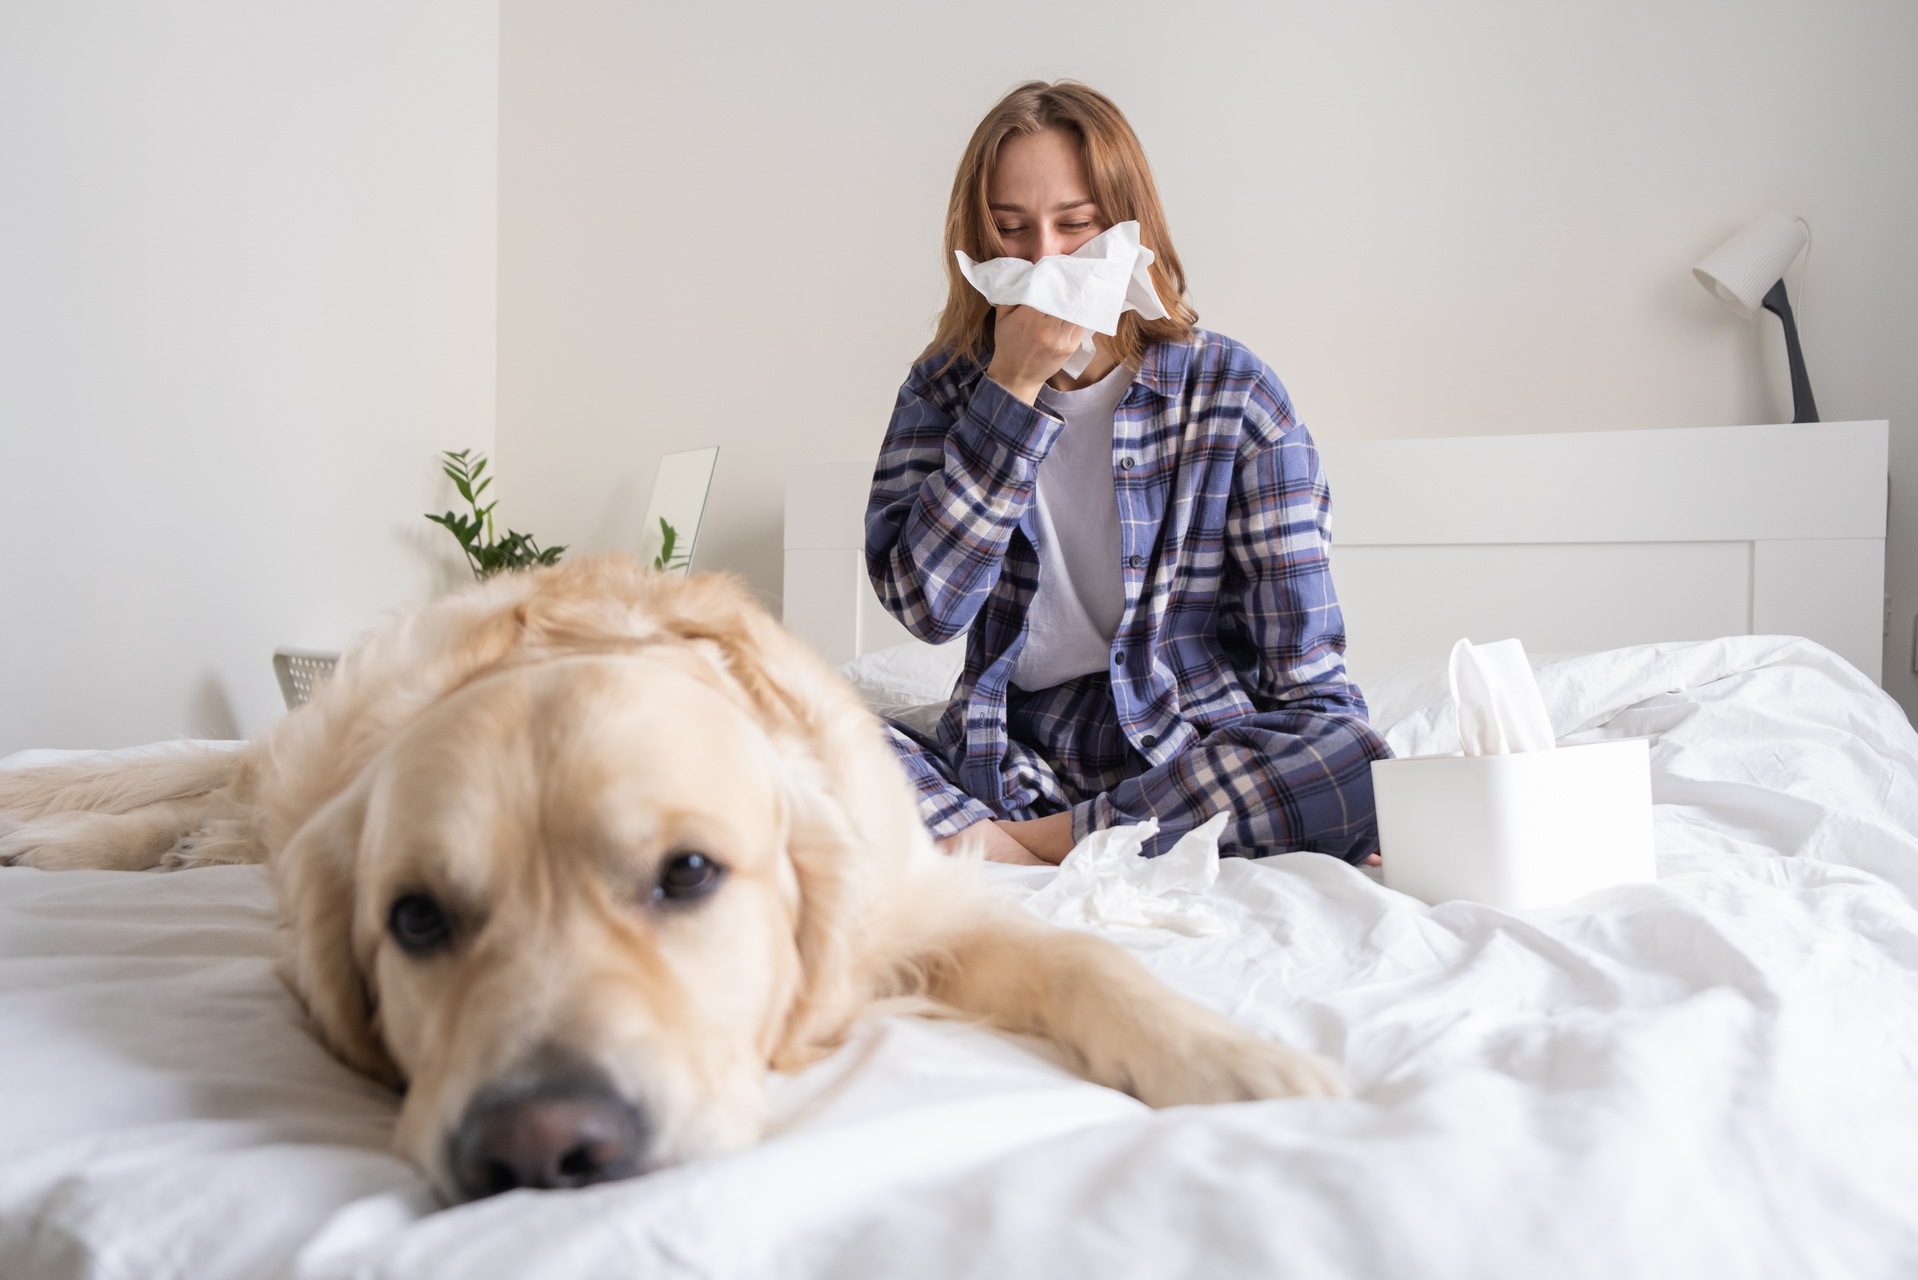 A sick woman in bed with a dog